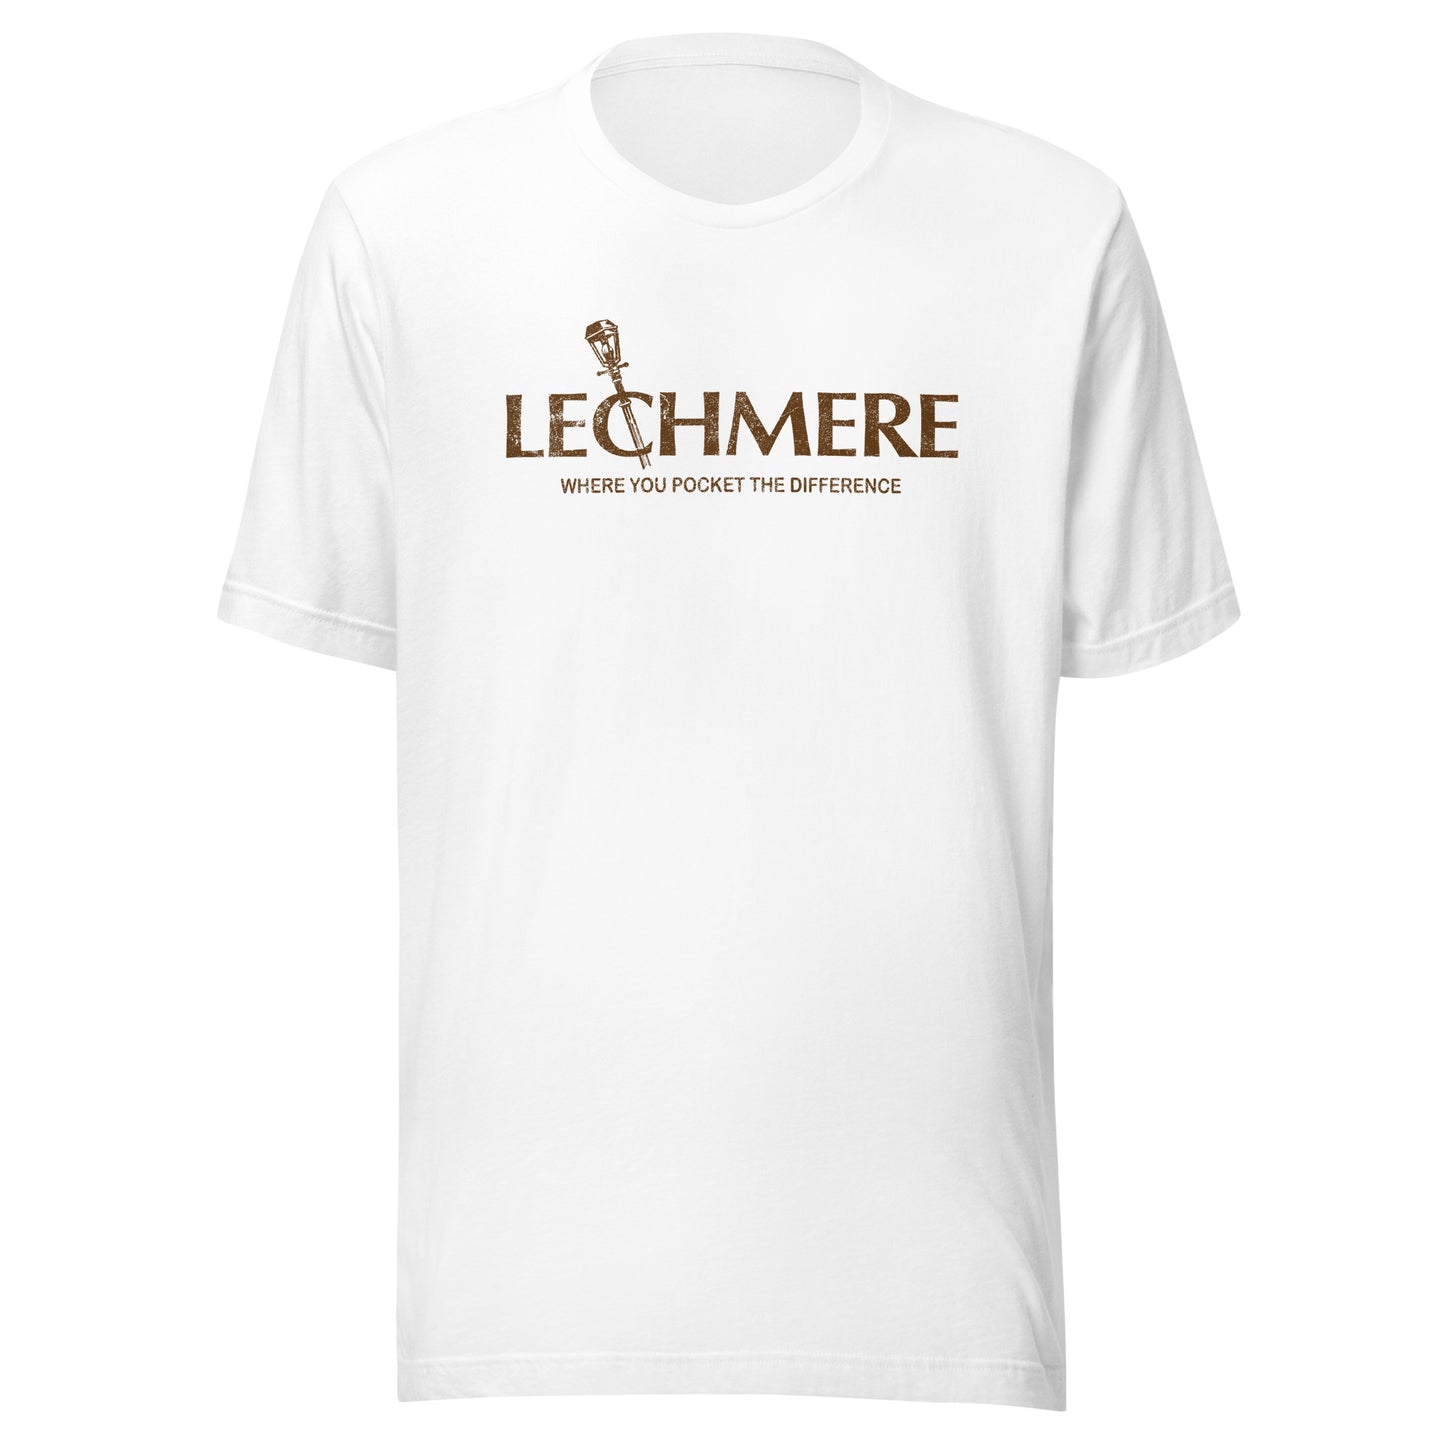 Lechmere Retro 1980s T-Shirt - Vintage Mens & Womens Old School Tee